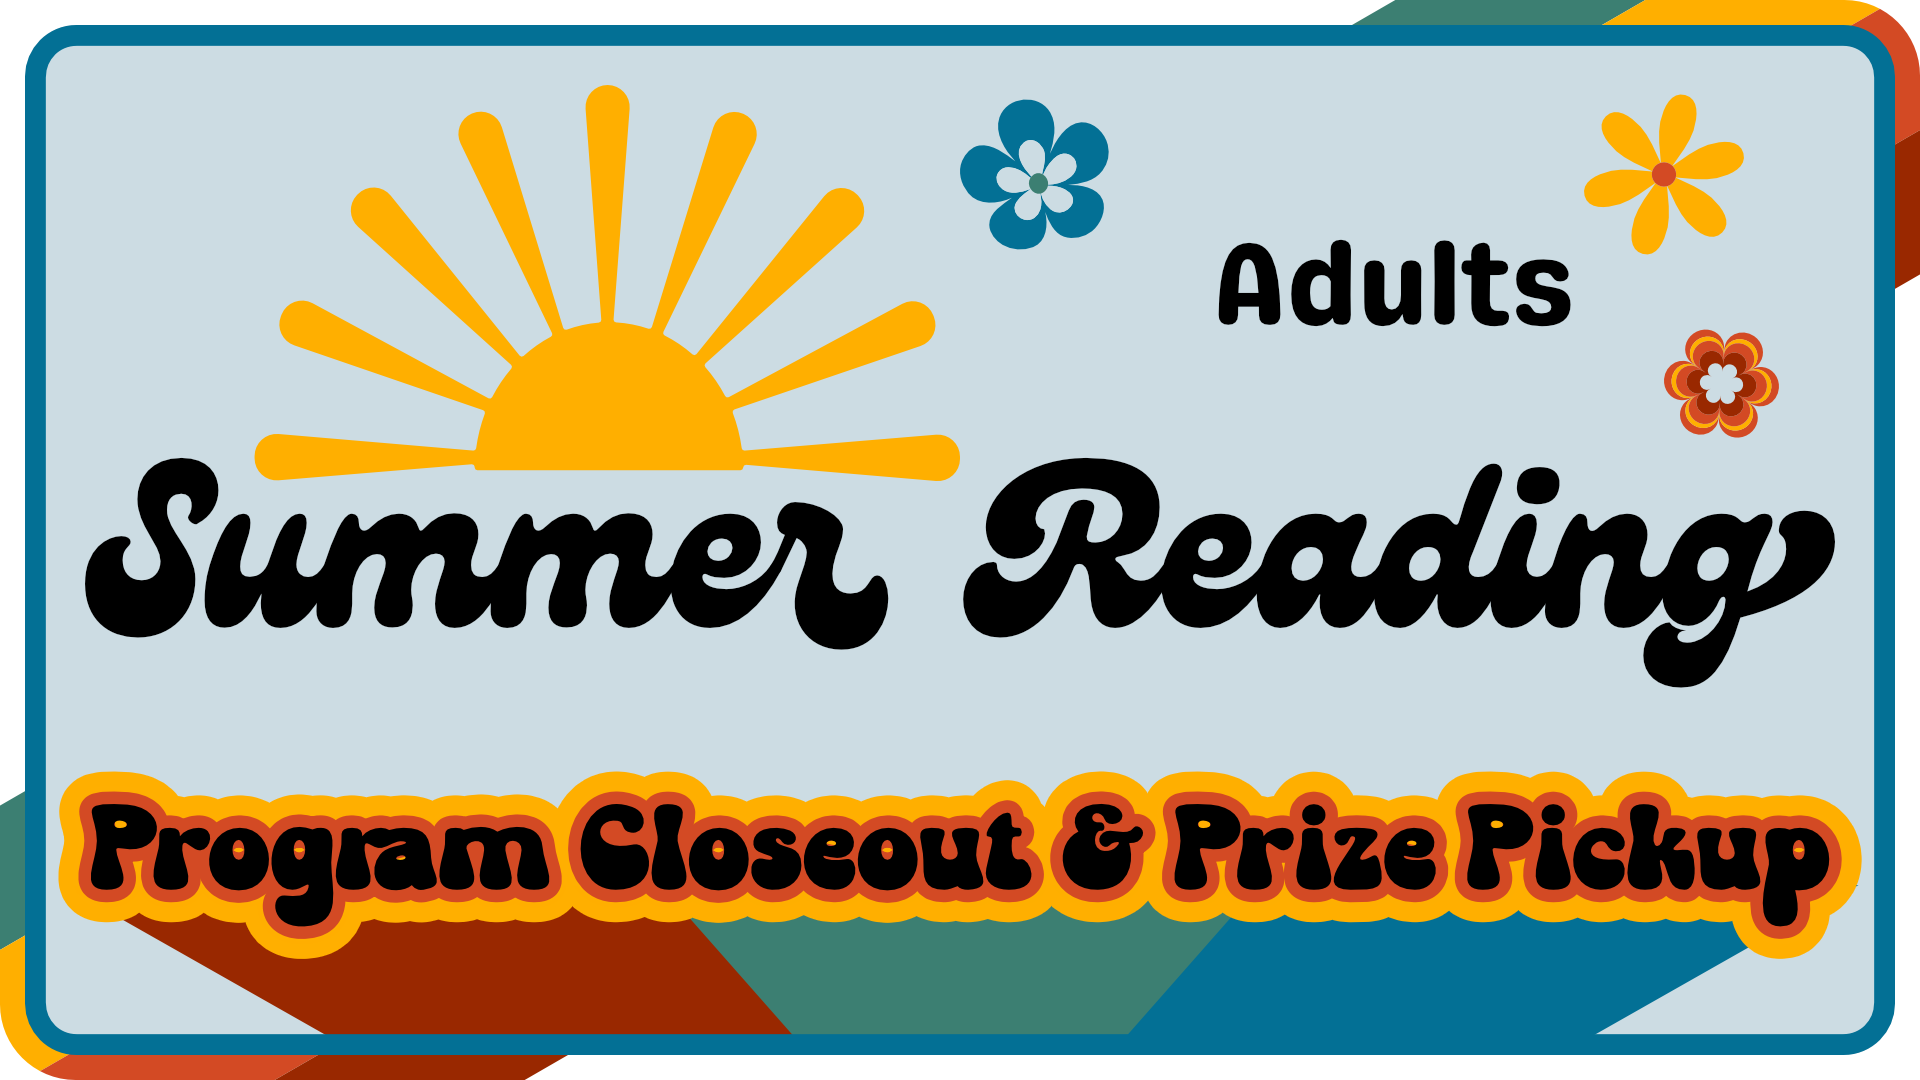 Summer Reading program closeout and prize pickup for adults